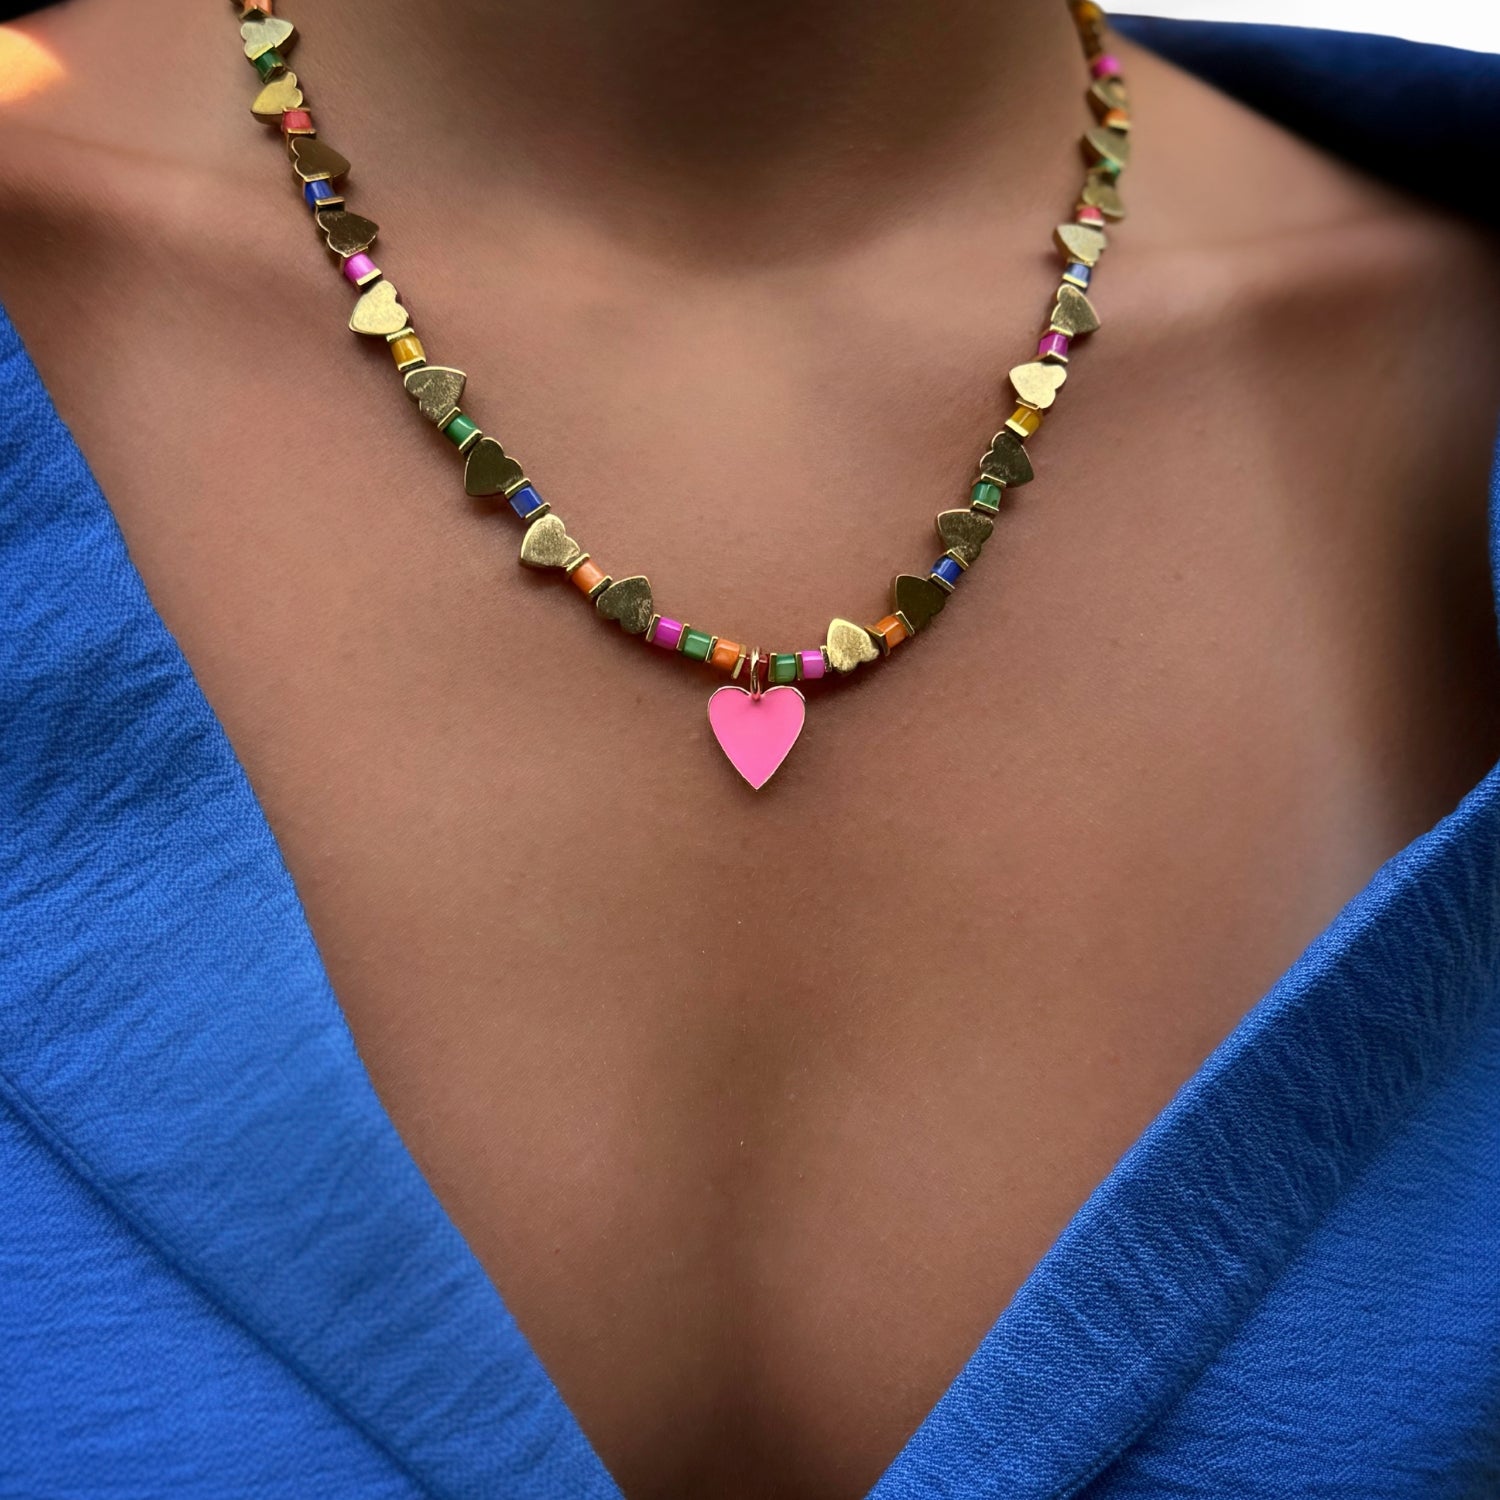 Model Wearing Gold Hematite Heart Beaded Necklace with Pink Enamel Pendant